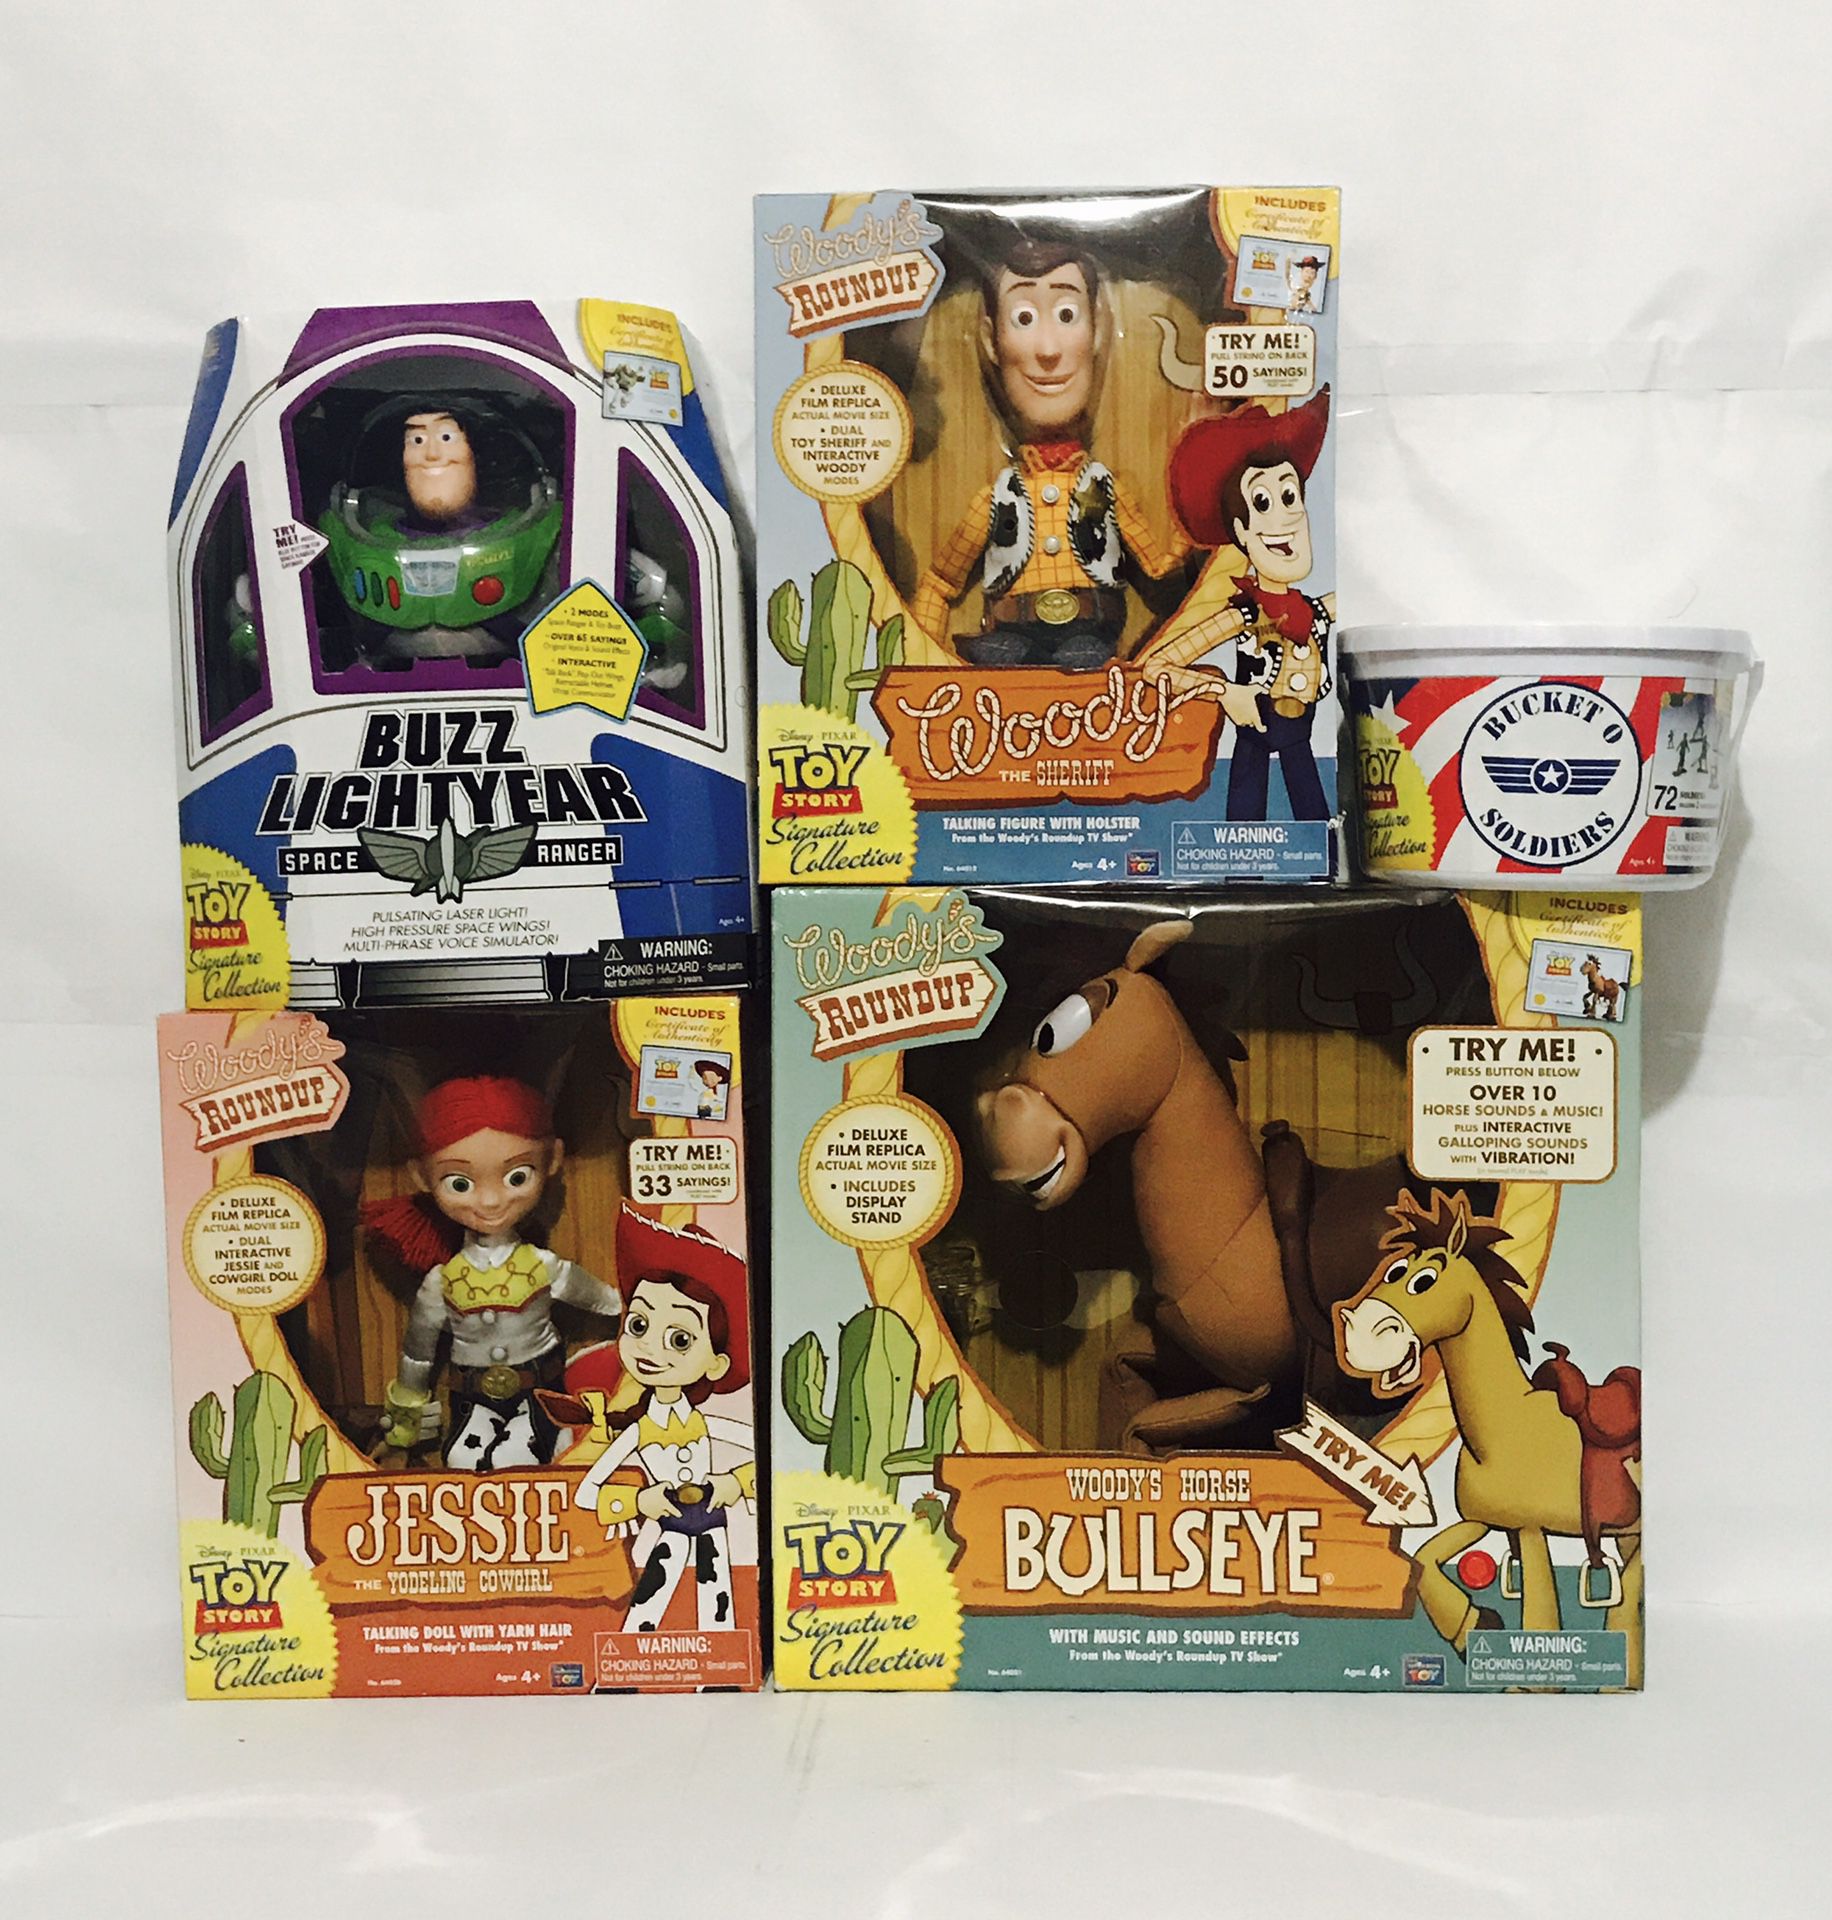 Figurine Buzz Woody Toy Story collection signature